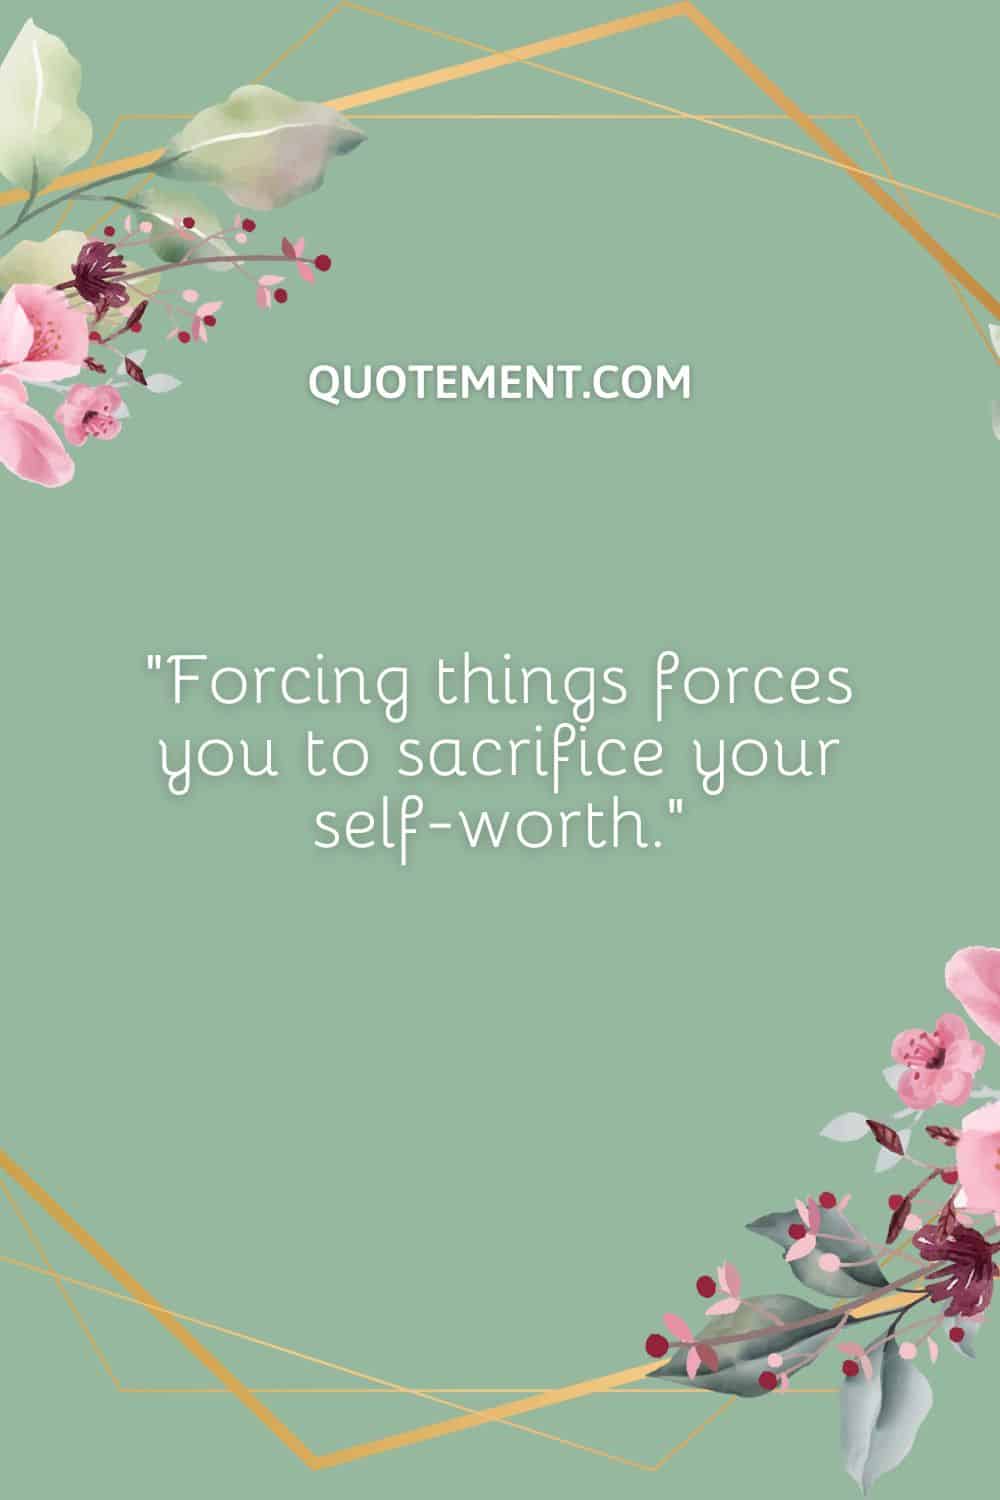 Forcing things forces you to sacrifice your self-worth